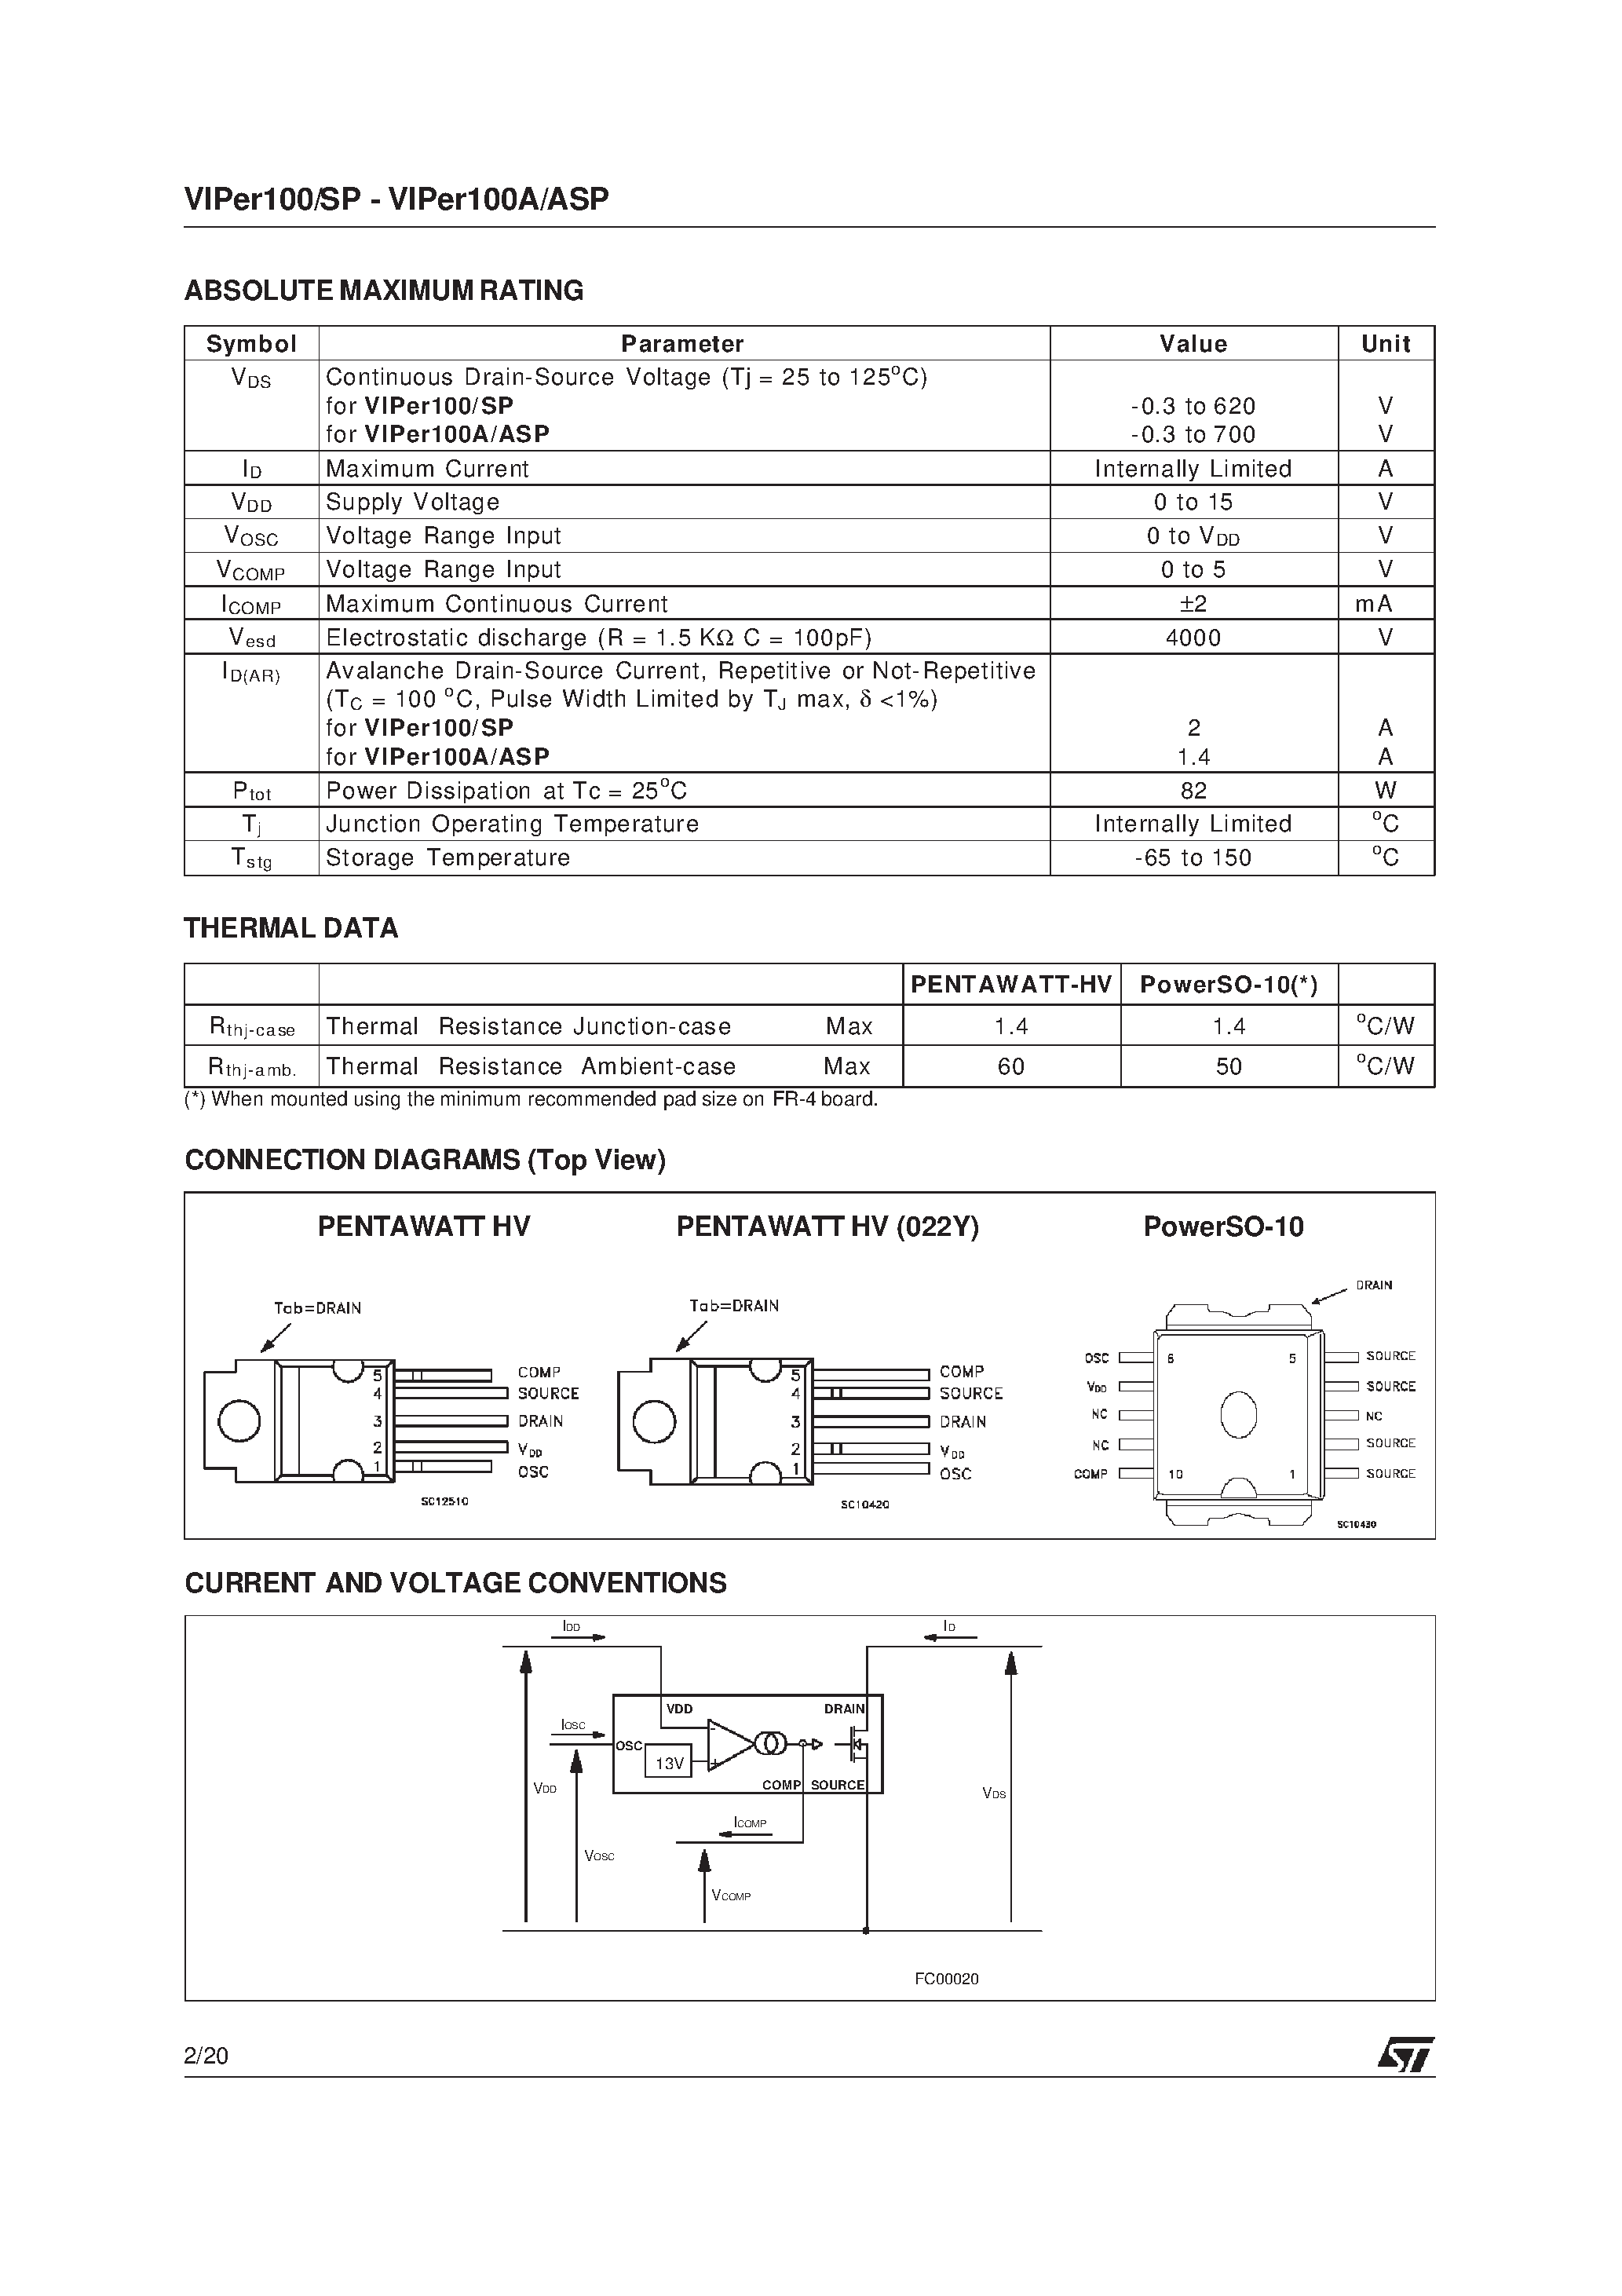 Datasheet VIPer100SP - SMPS PRIMARY I.C. page 2